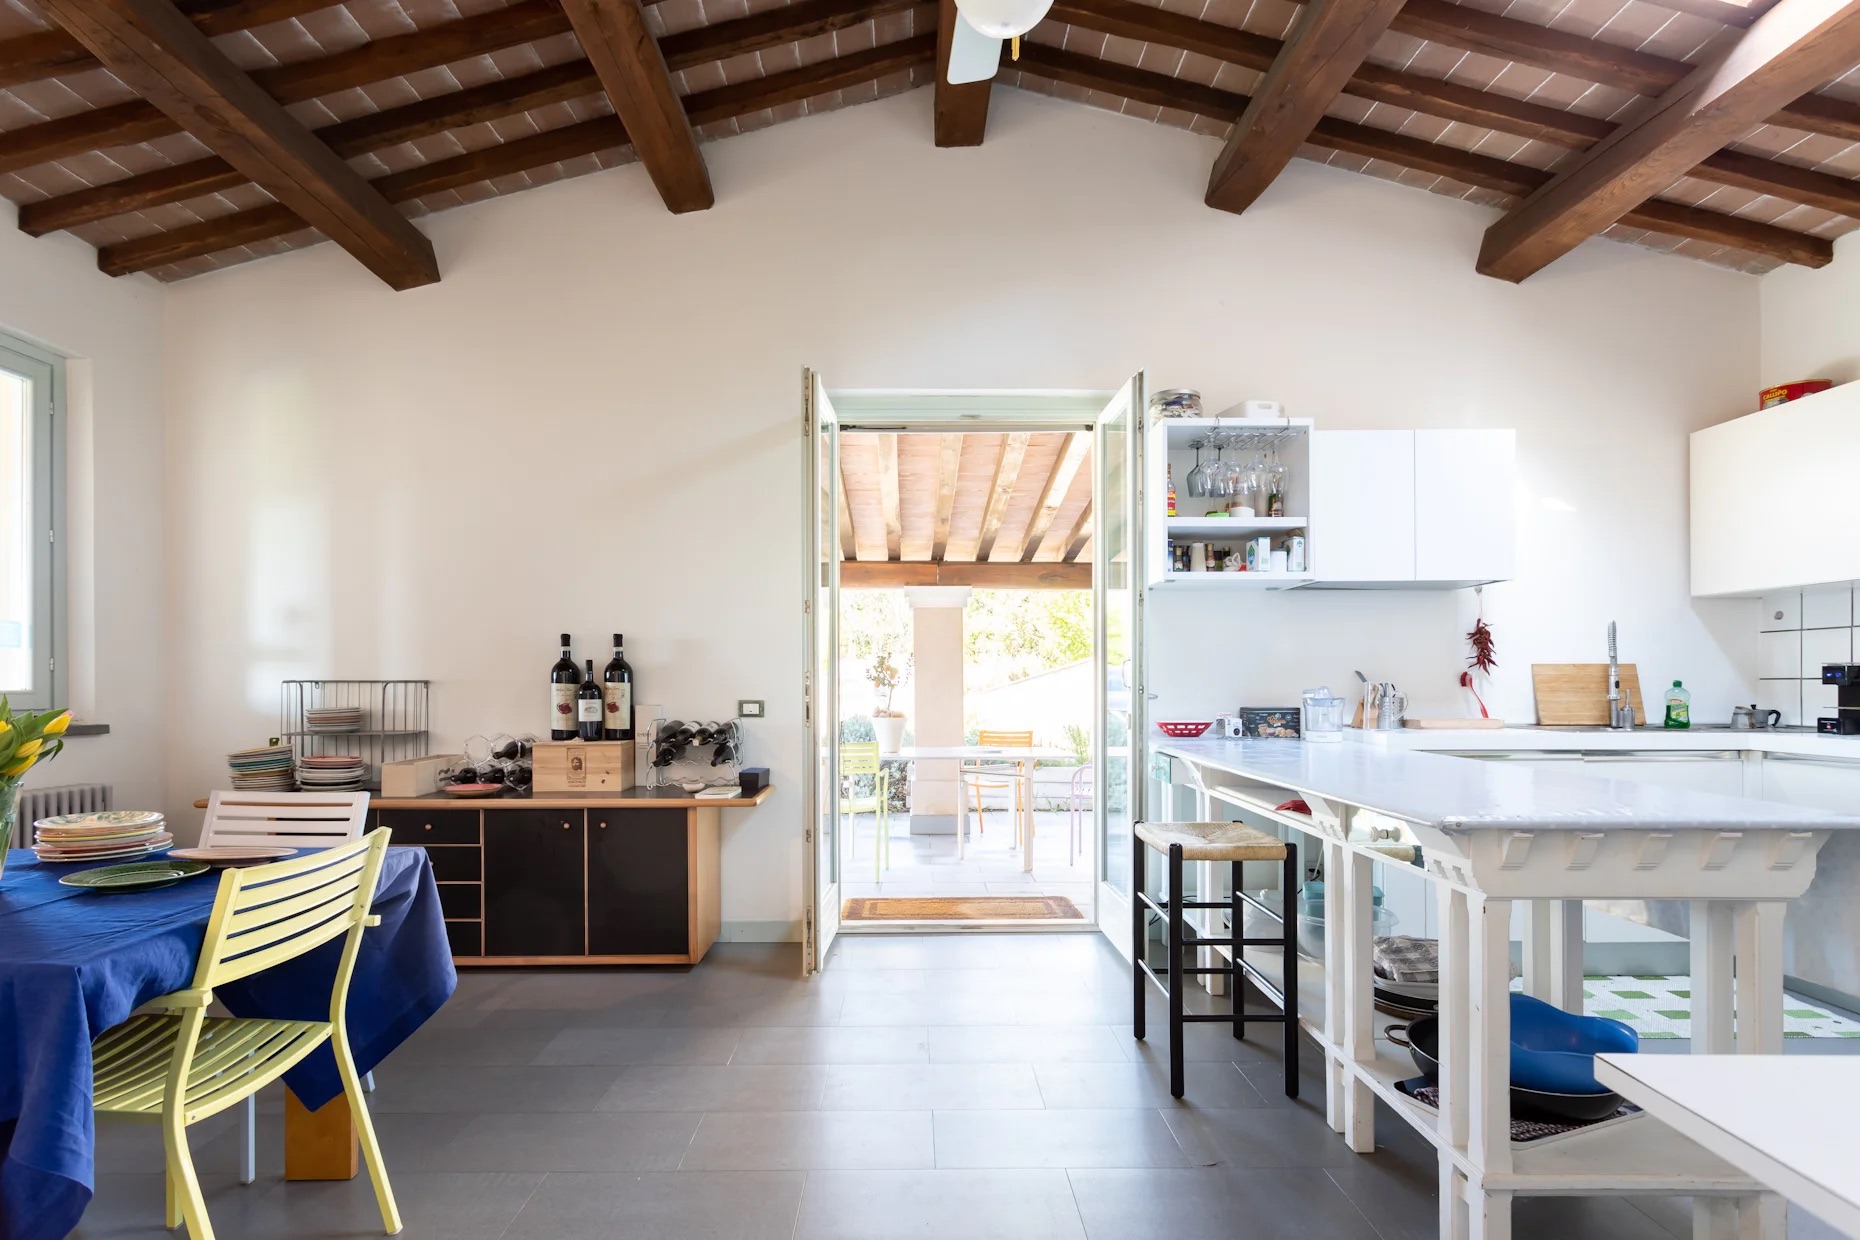 beamed ceiling, open kitchen in villa in italy